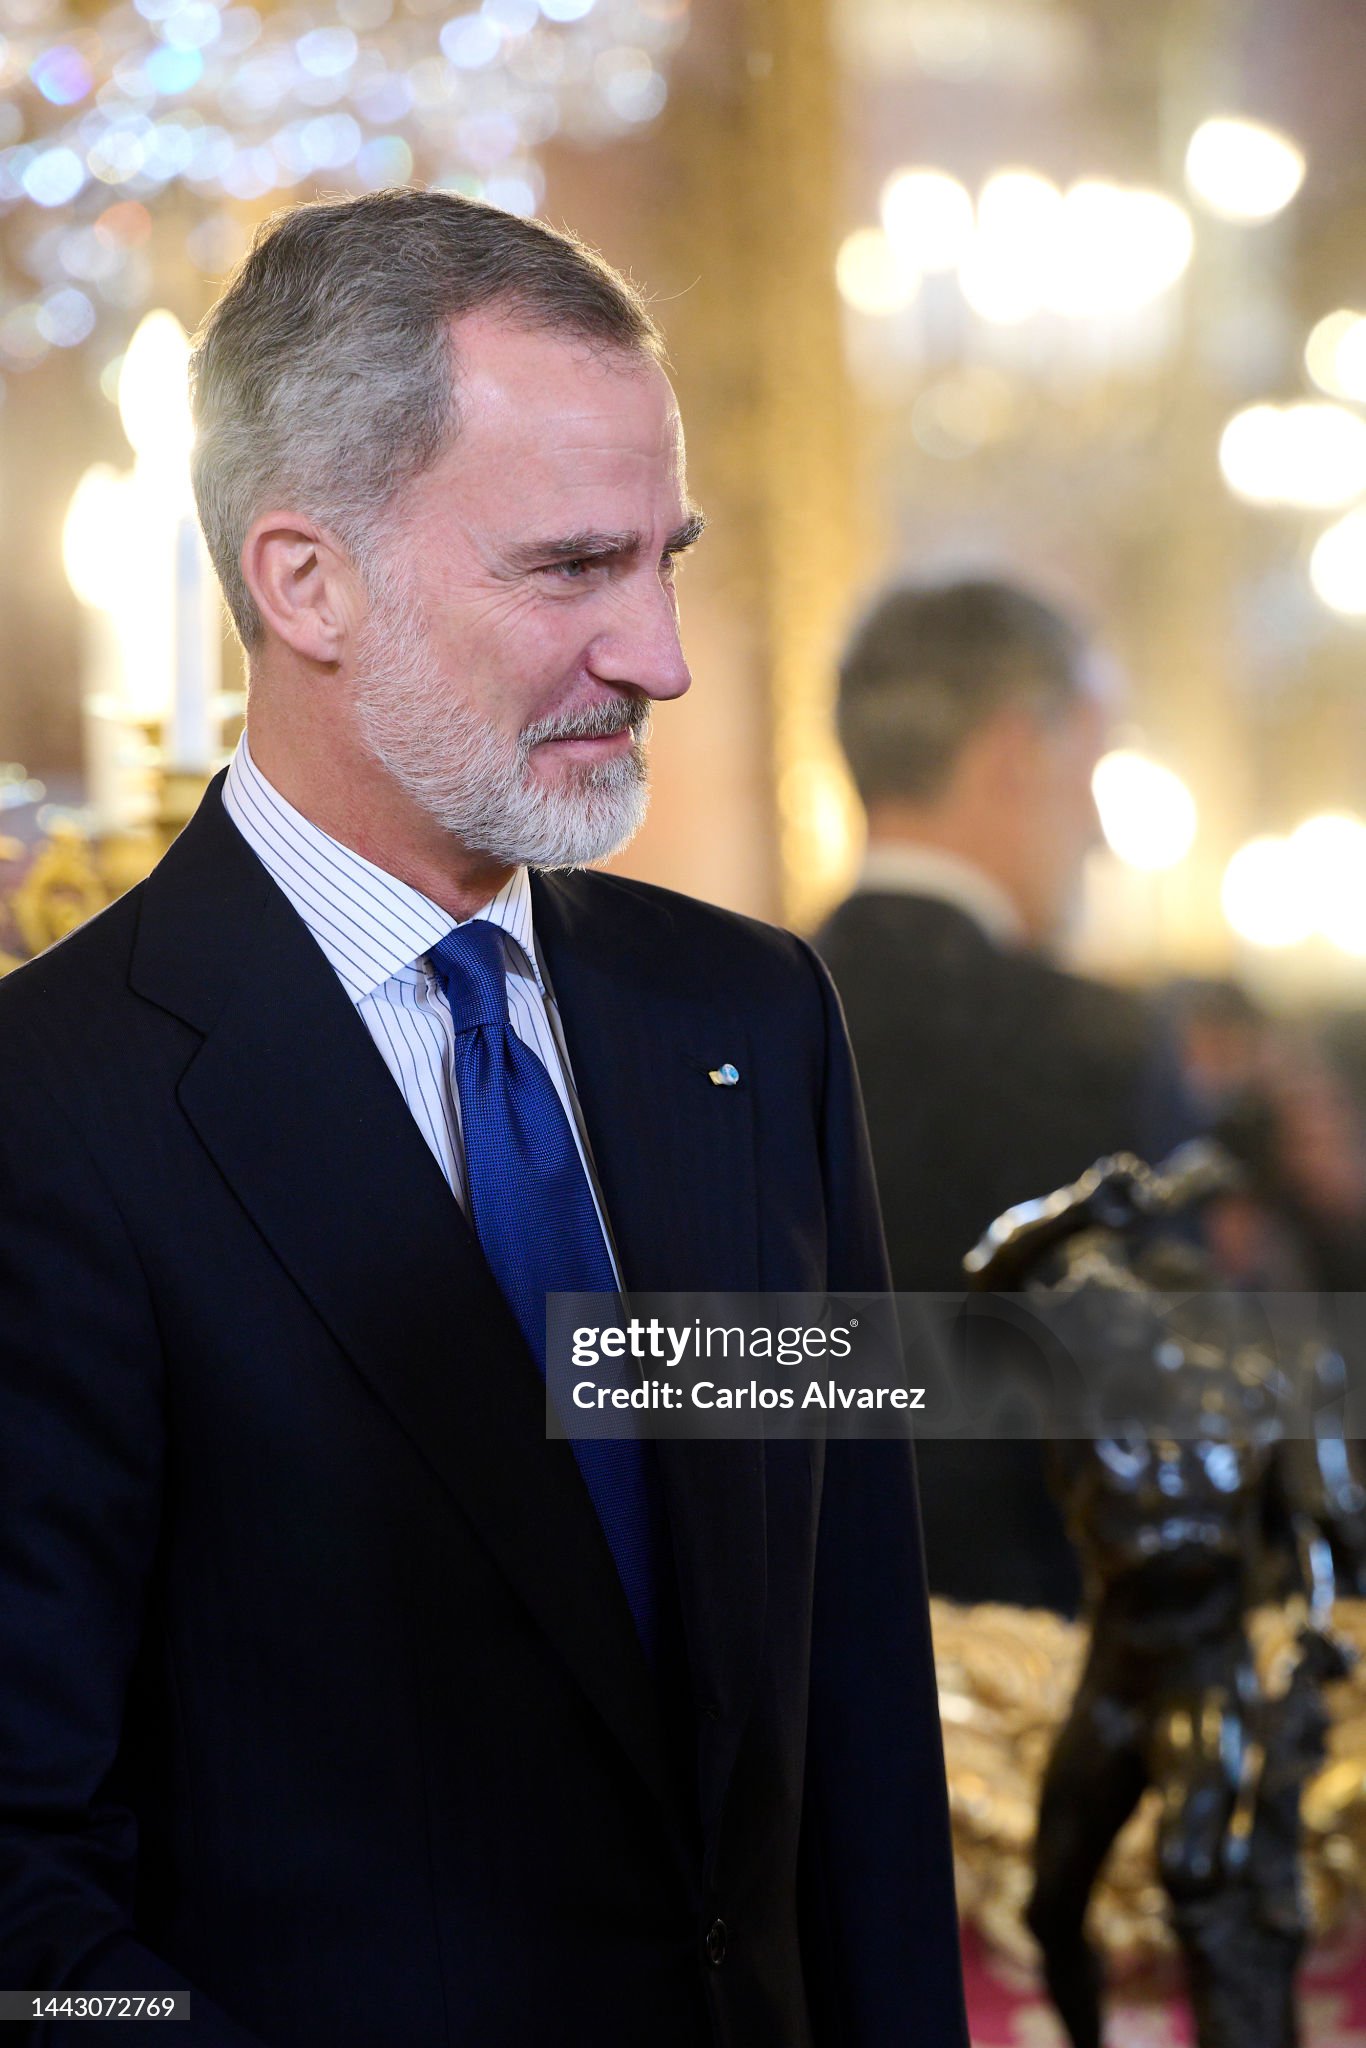 spanish-royals-attend-an-audience-with-participants-of-the-annual-session-of-the-nato.jpg?s=2048x2048&w=gi&k=20&c=Y0Qw-jupvtgd8MrX6-QRB0eIsyviEootq5LXodHuw5Y=